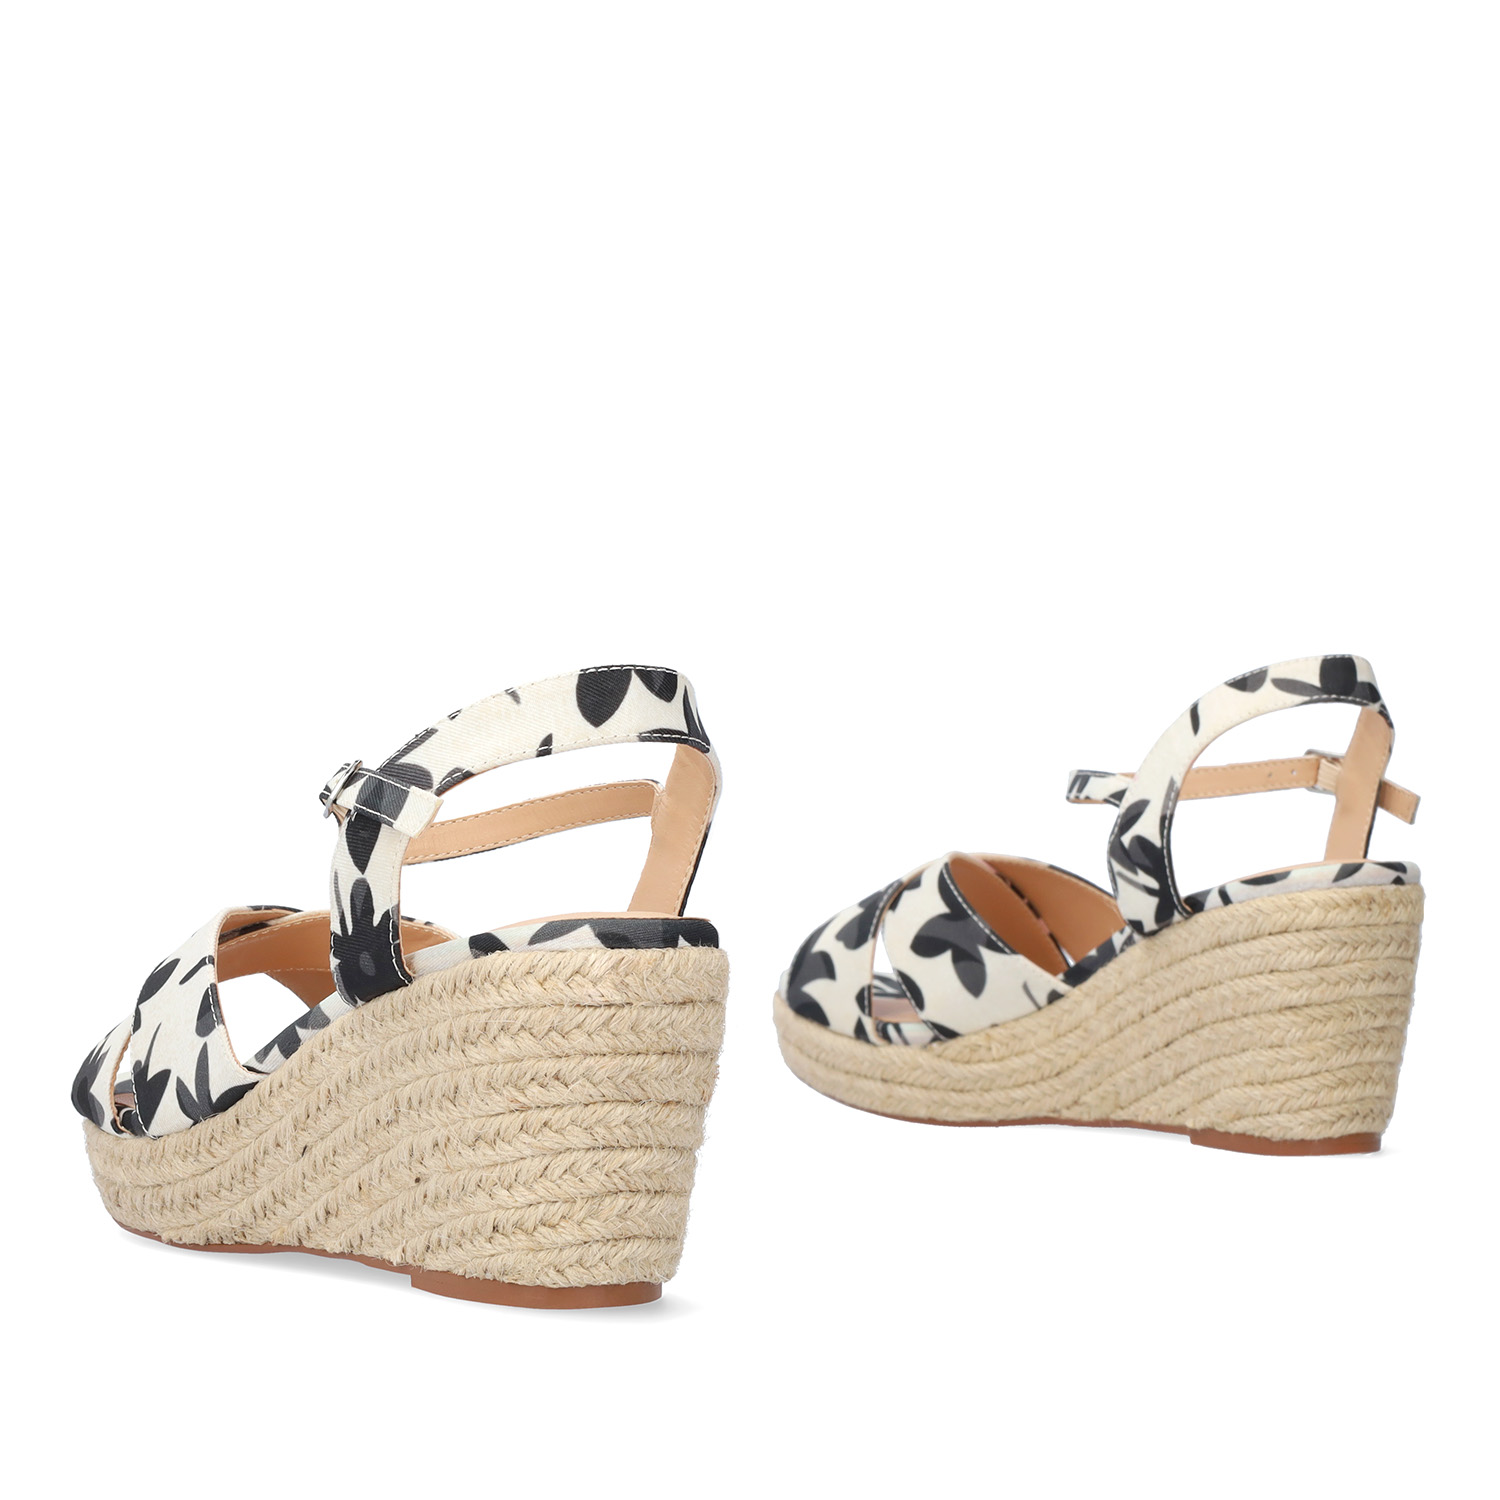 Black-toned fabric sandal with a jute wedge 